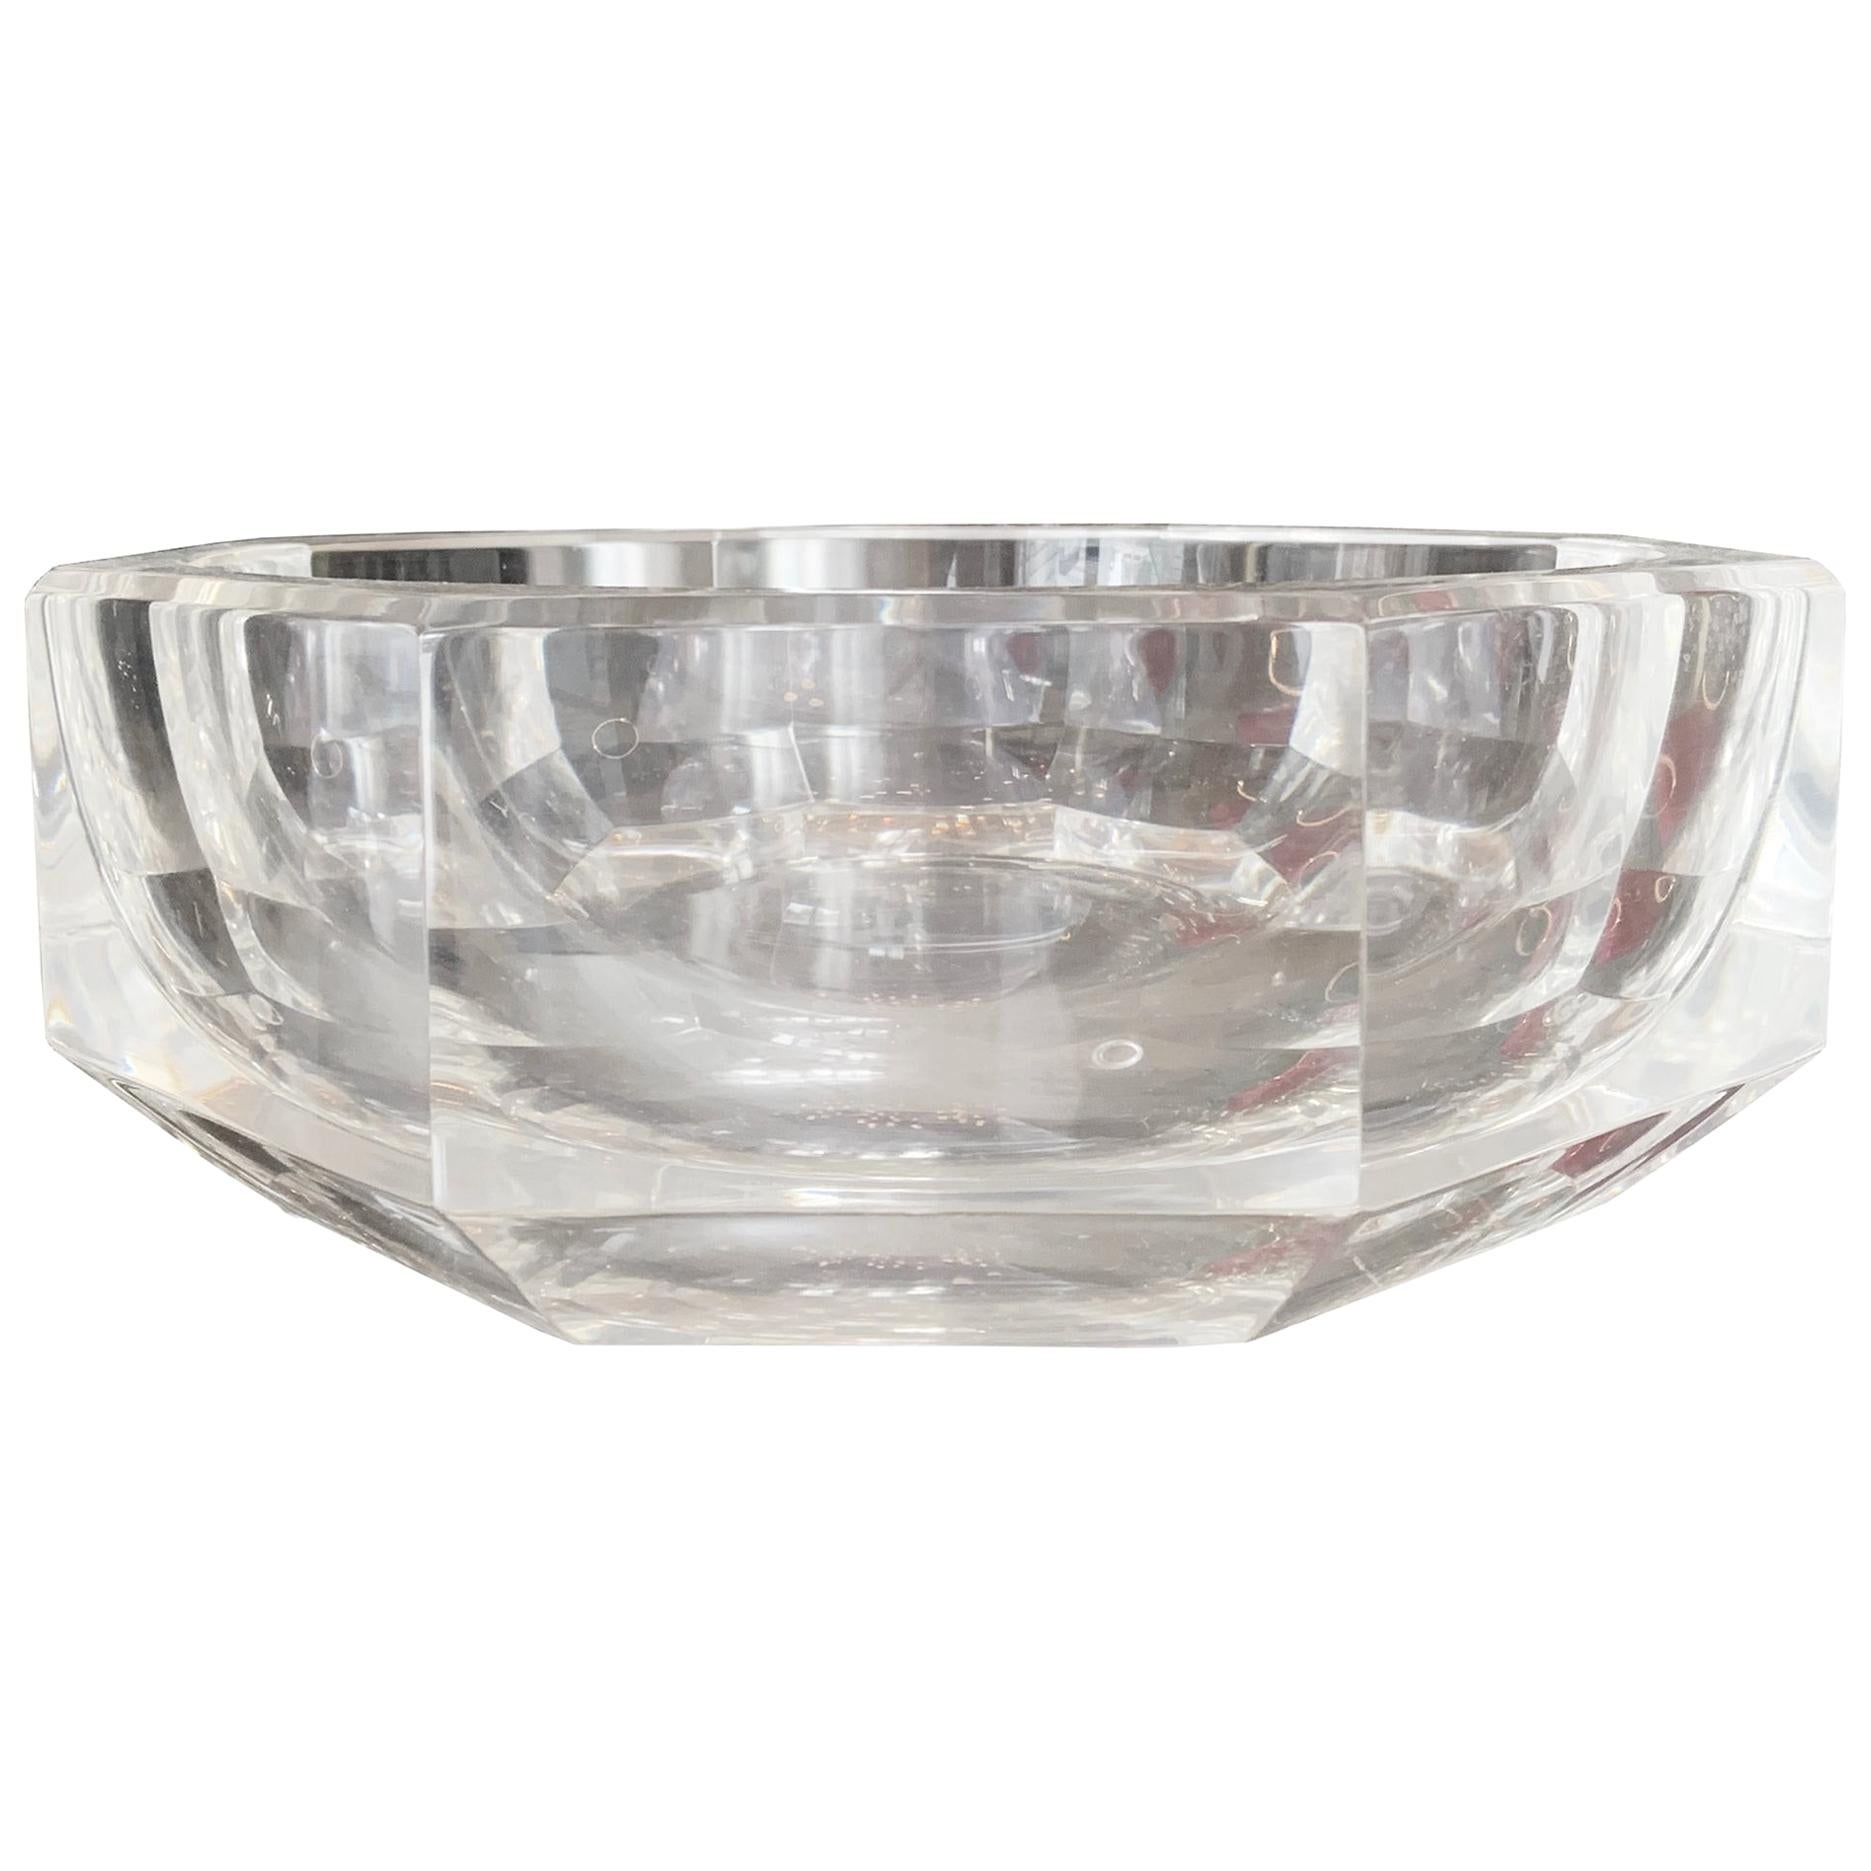 Extra Large Faceted Lucite Bowl, circa 1970s For Sale